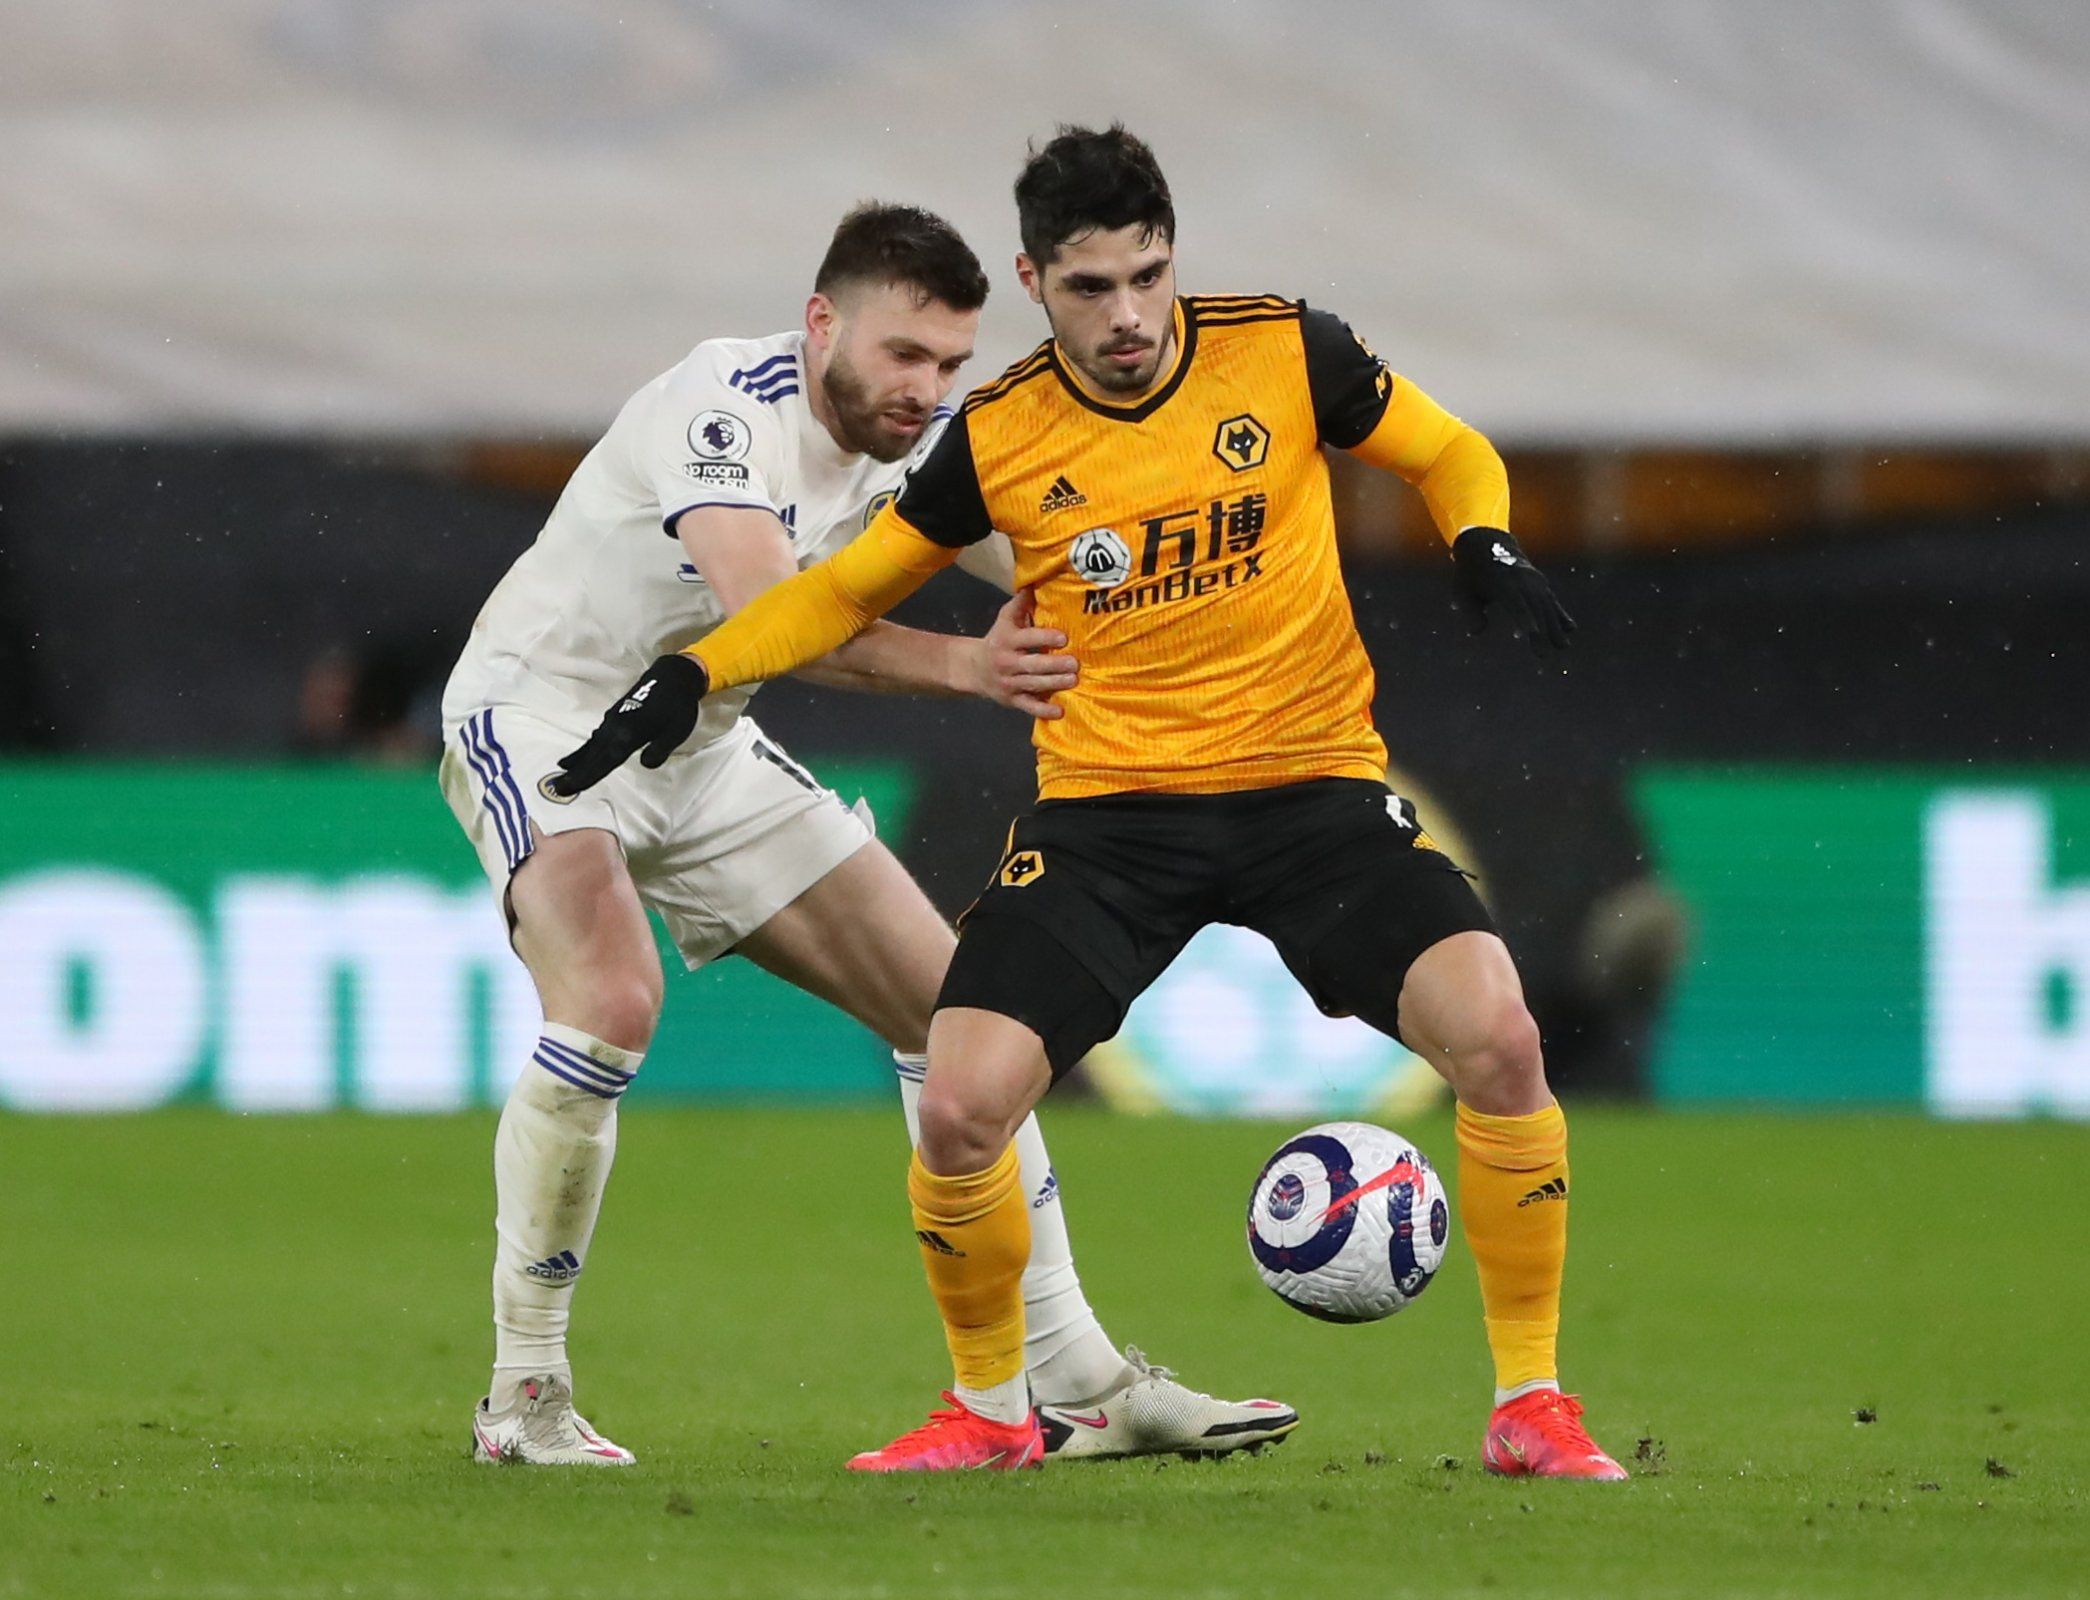 Bruno Lage, Fosun, Jeff Shi, Molineux, The Old Gold, Wolves, Wolves fans, Wolves info, Wolves latest, Wolves news, Wolves updates, WWFC, WWFC news, WWFC update, Premier League, Premier League news, Wolverhampton Wanderers, Pedro Neto, Market Movers, 
